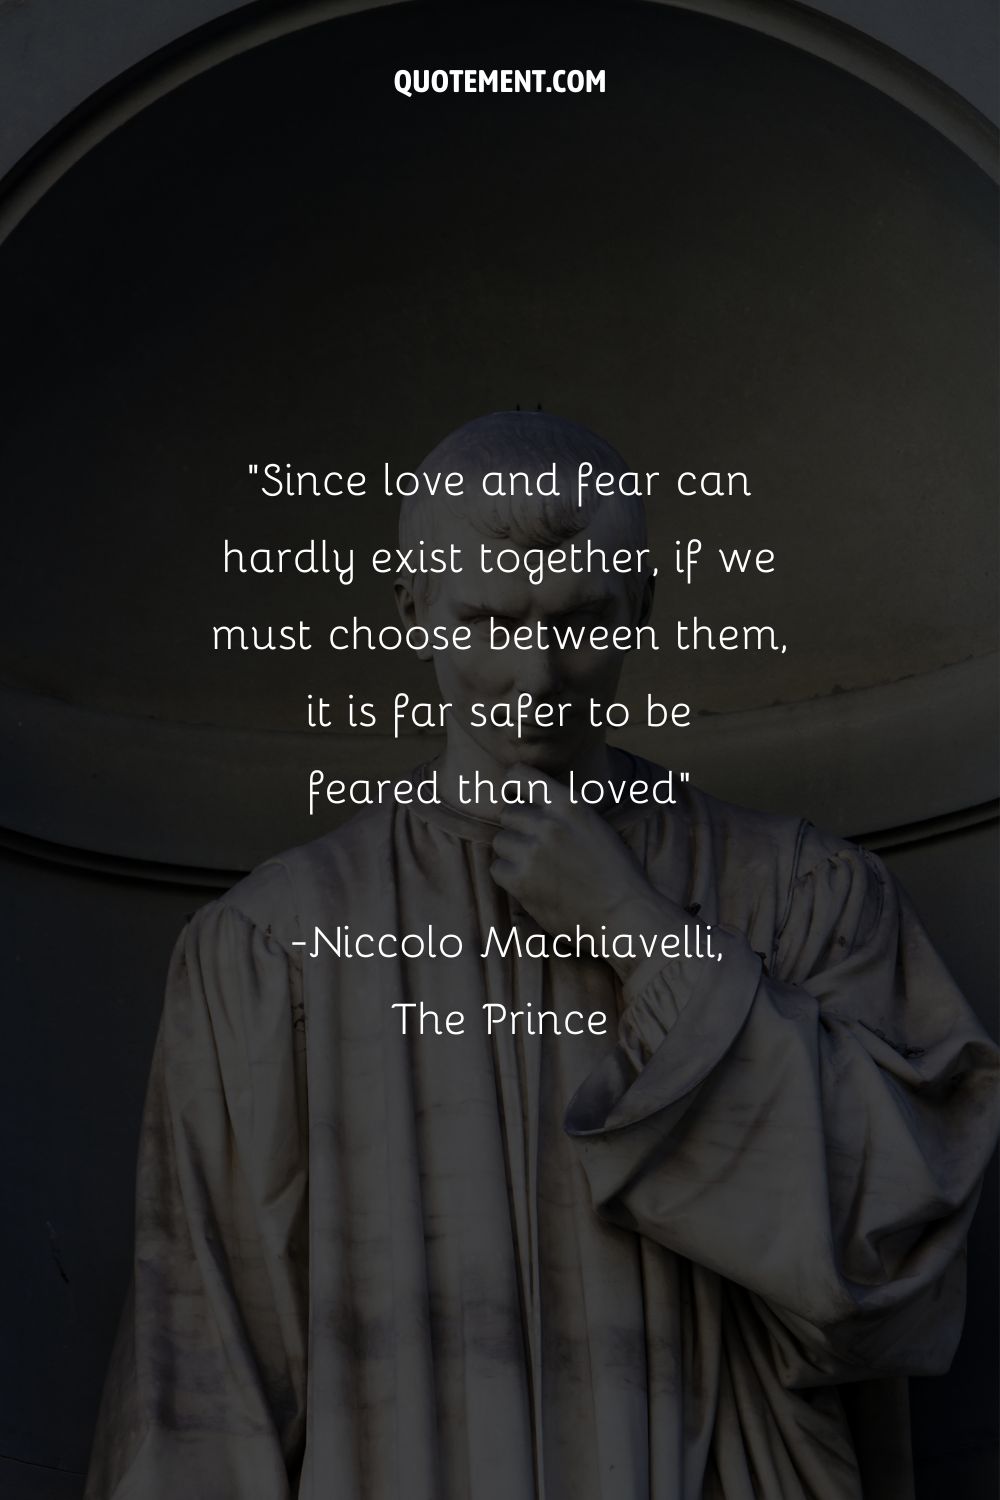 Since love and fear can hardly exist together, if we must choose between them, it is far safer to be feared than loved